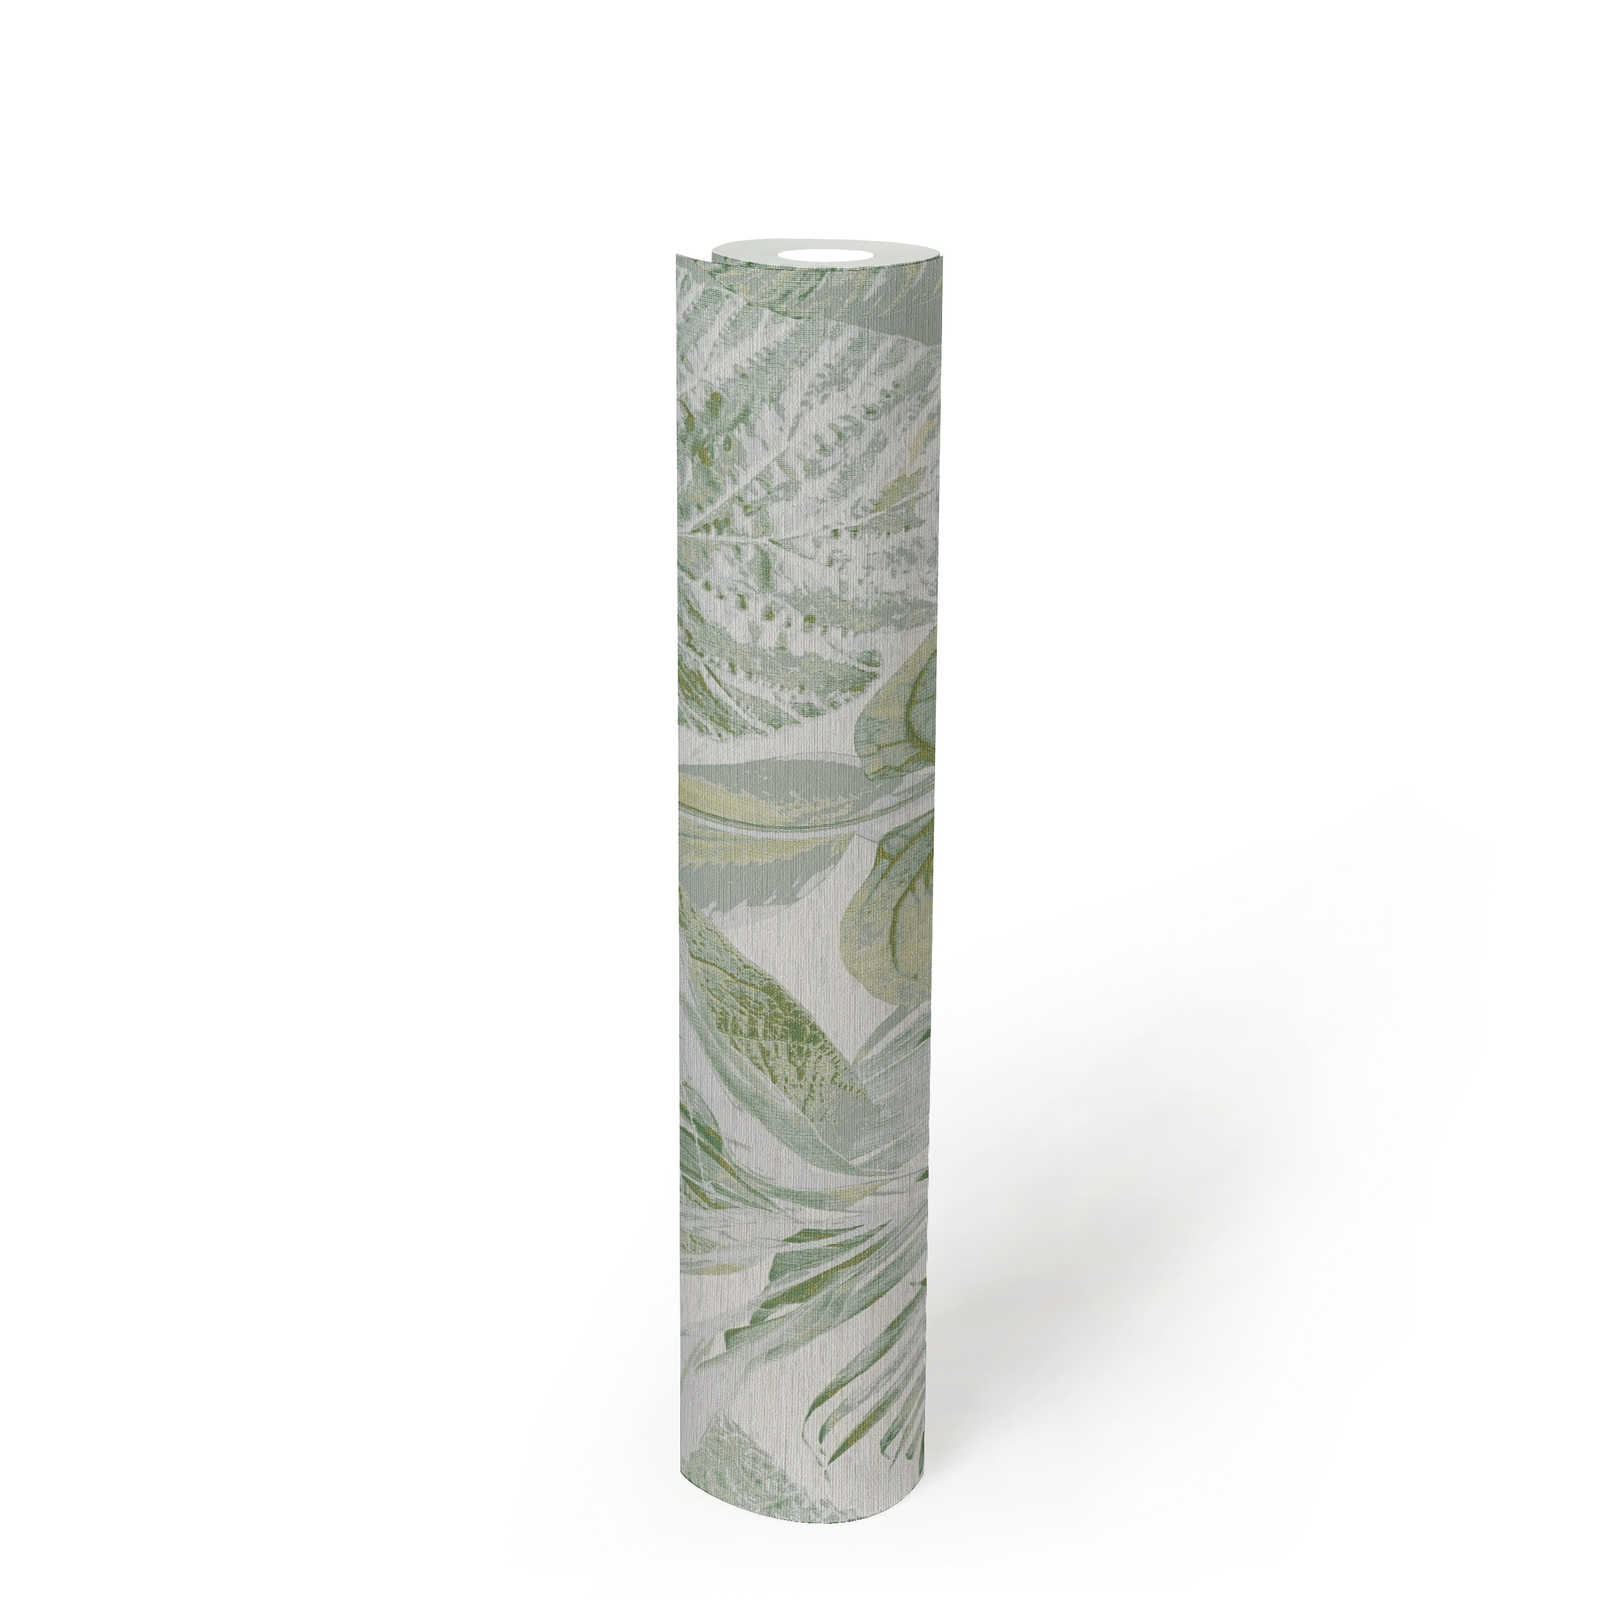             Wallpaper with leaves and jungle pattern light glossy - green, white, grey
        